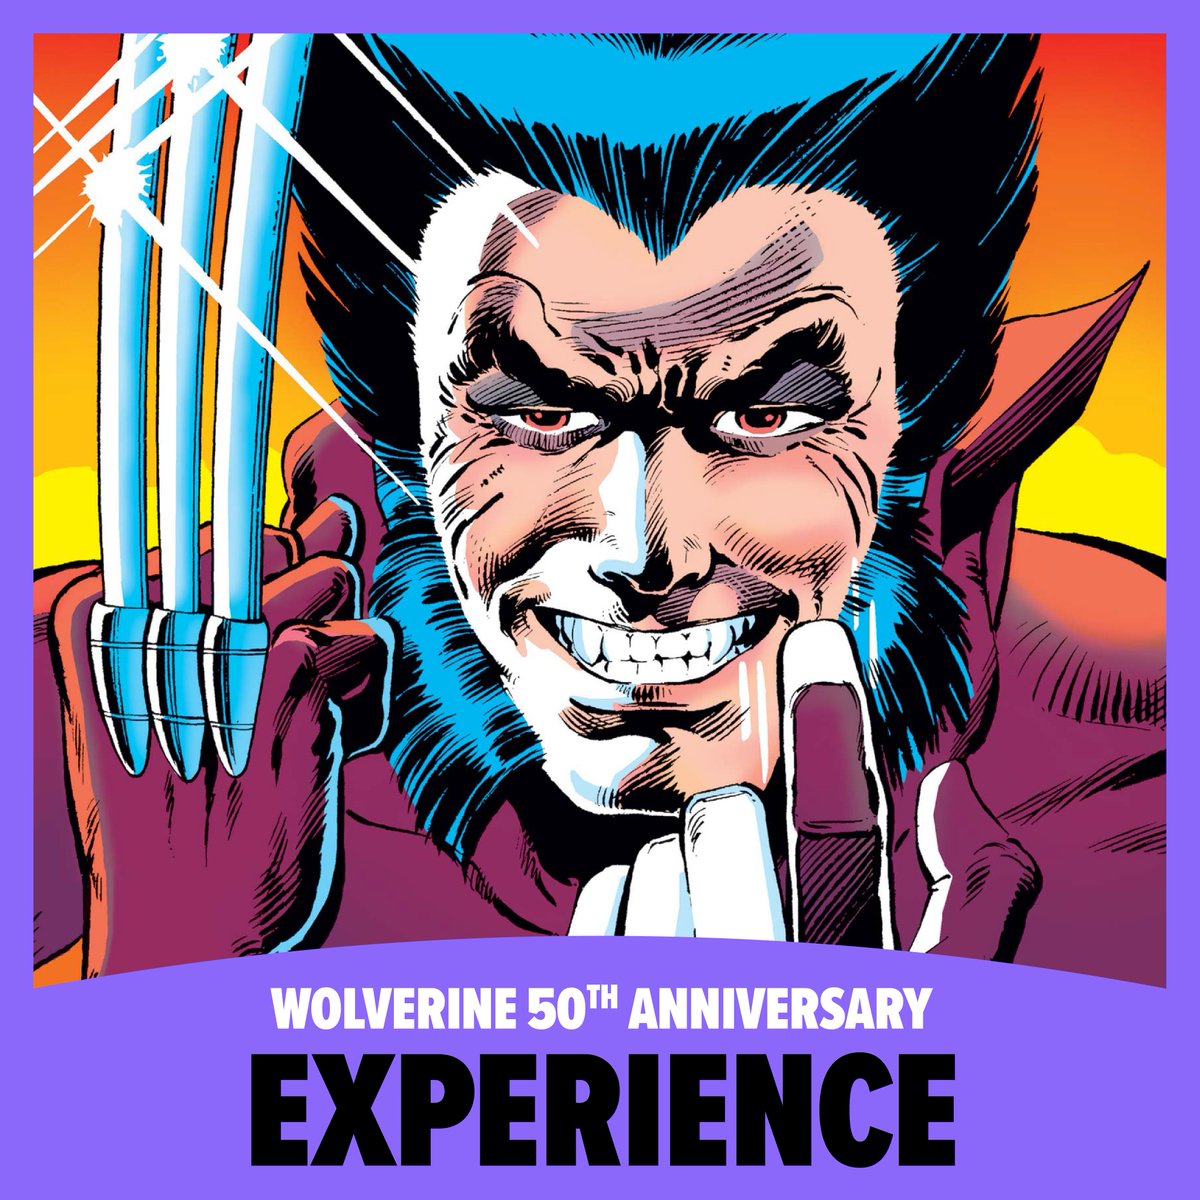 Frank Miller and Jason Aaron want to celebrate the 50th anniversary of Wolverine with you at FAN EXPO Denver. Join in on the free panel or grab a ticket to a special signing experience with Frank Miller. Get your experience tickets today. spr.ly/6017jGFxU